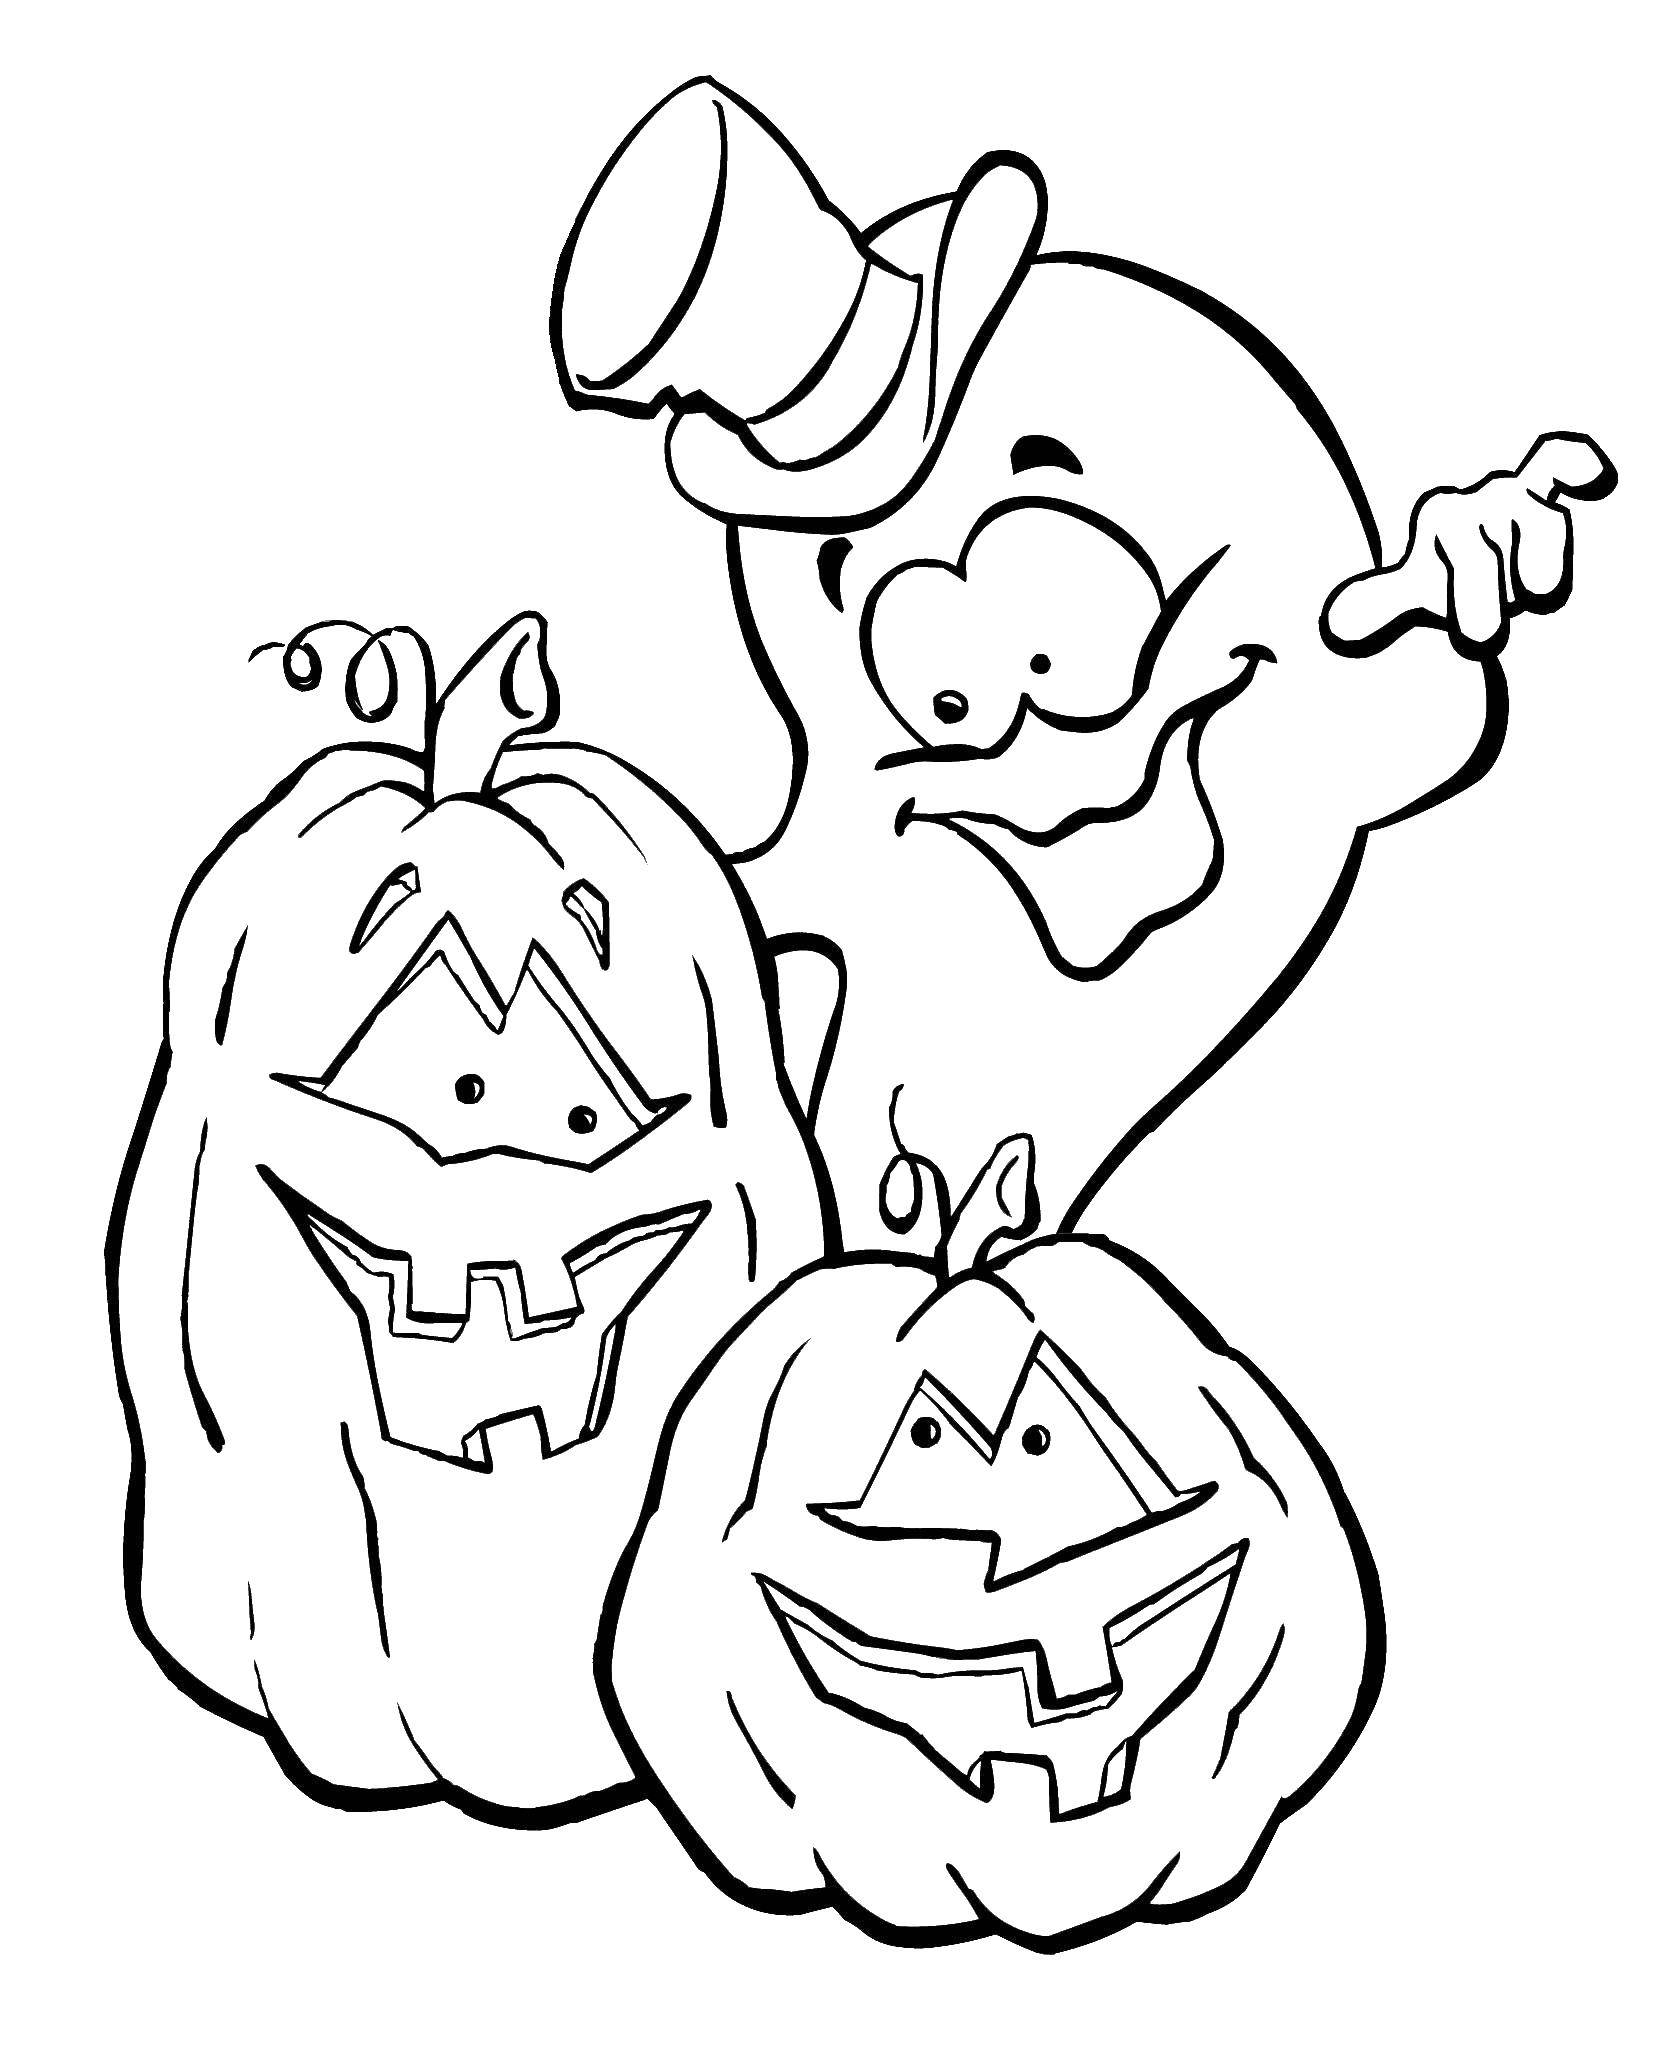 Coloring Pumpkin on Halloween with a Ghost. Category pumpkin Halloween. Tags:  pumpkin, Halloween.